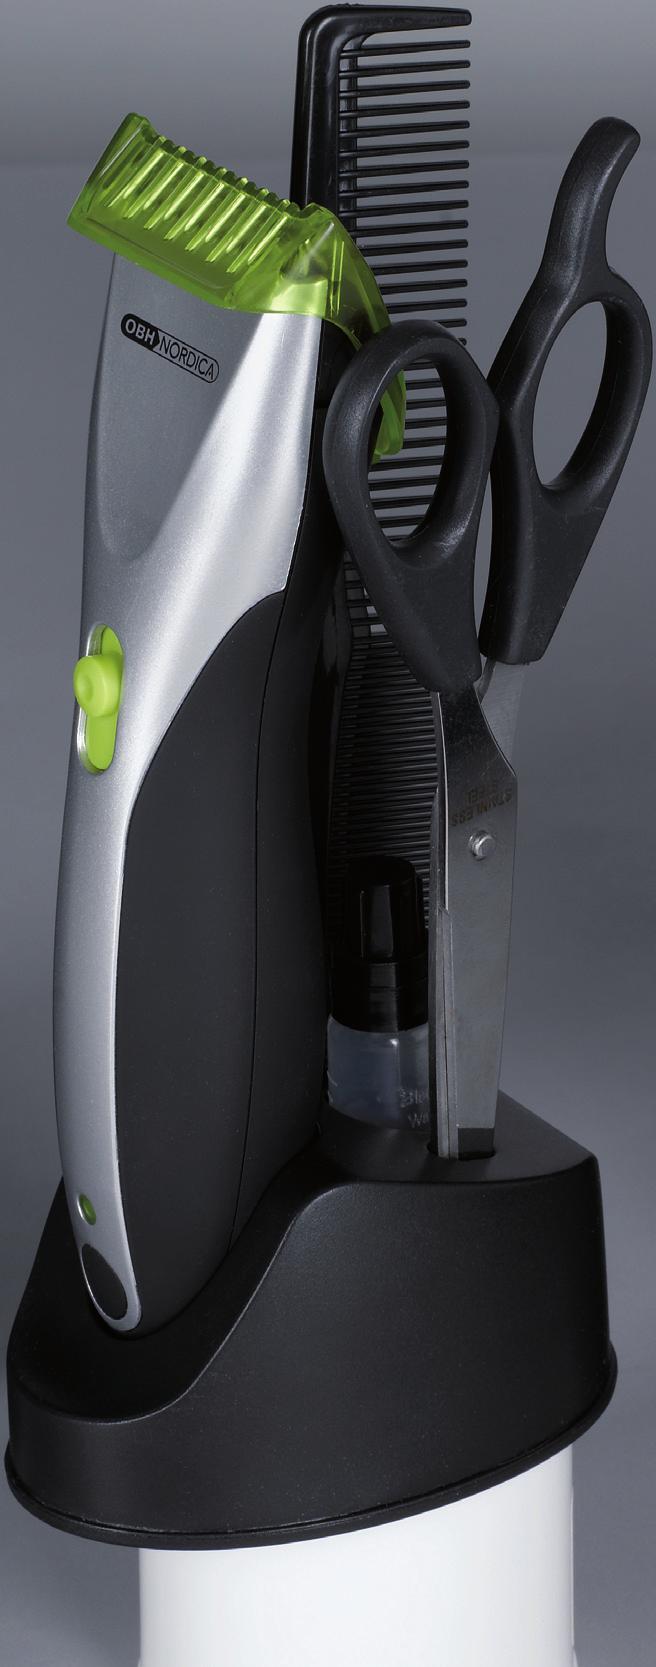 attraxion easy trim Easy and efficient trimming An easy to use and compact hair clipper. Change quickly from one length to another.